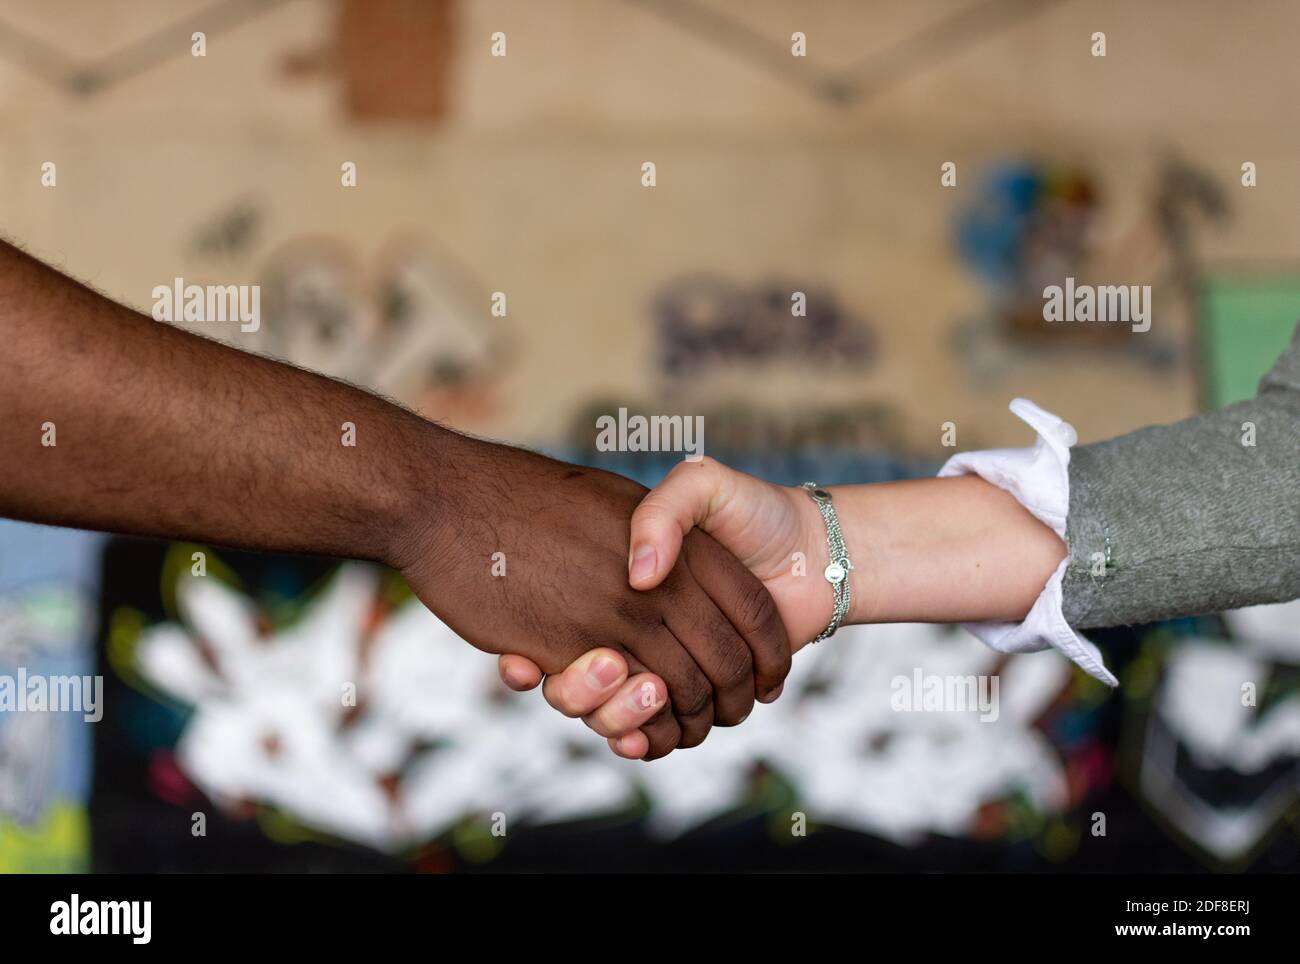 Black man and white woman holding hands. Union concept. Stop racism. Graffiti wall background. Stock Photo